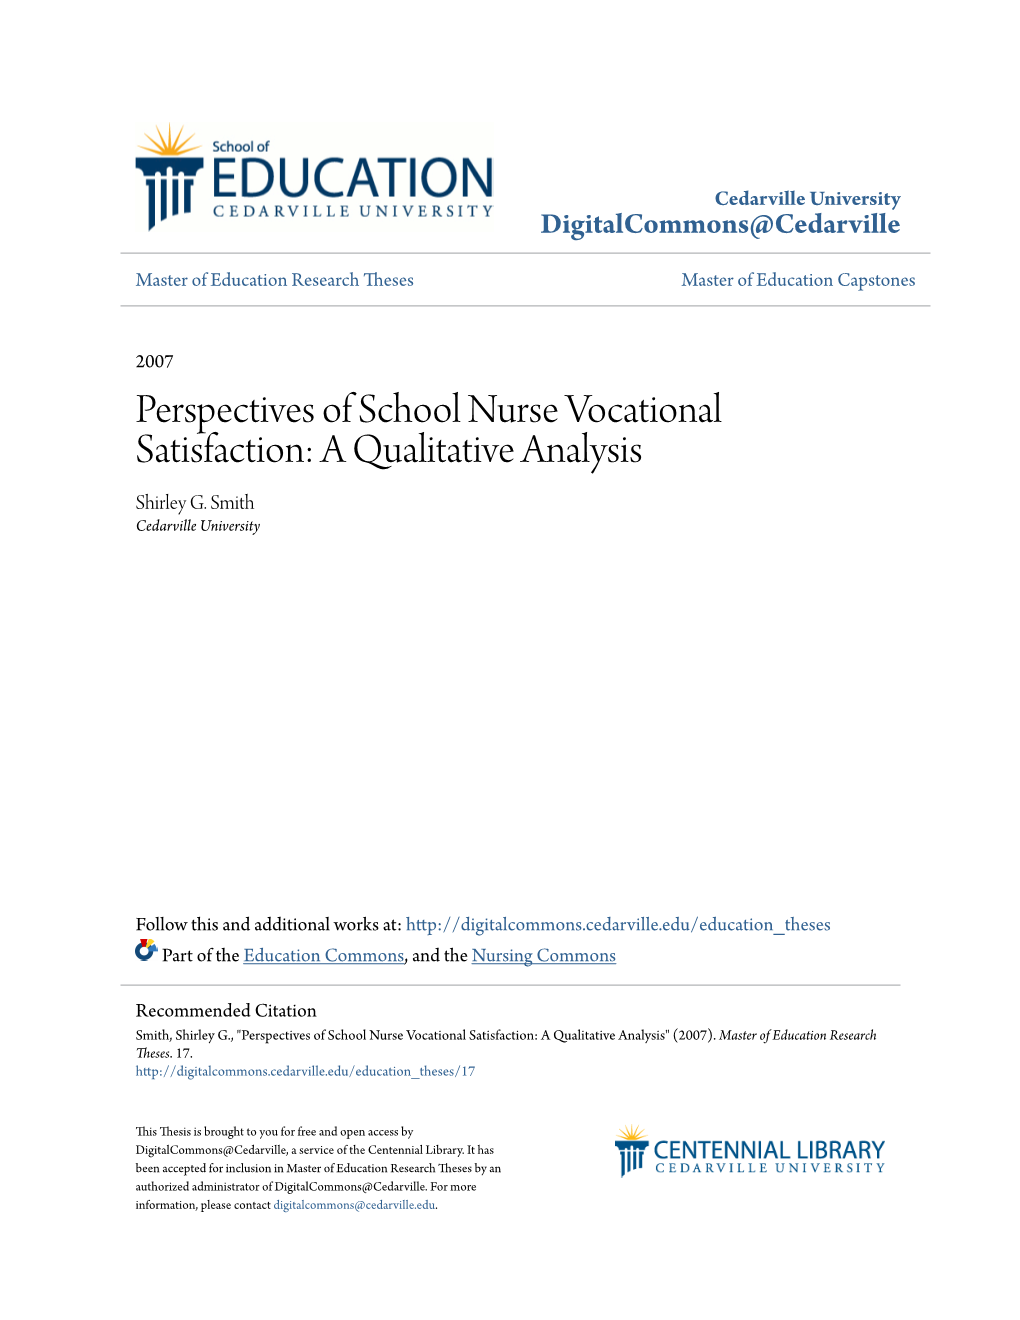 Perspectives of School Nurse Vocational Satisfaction: a Qualitative Analysis Shirley G